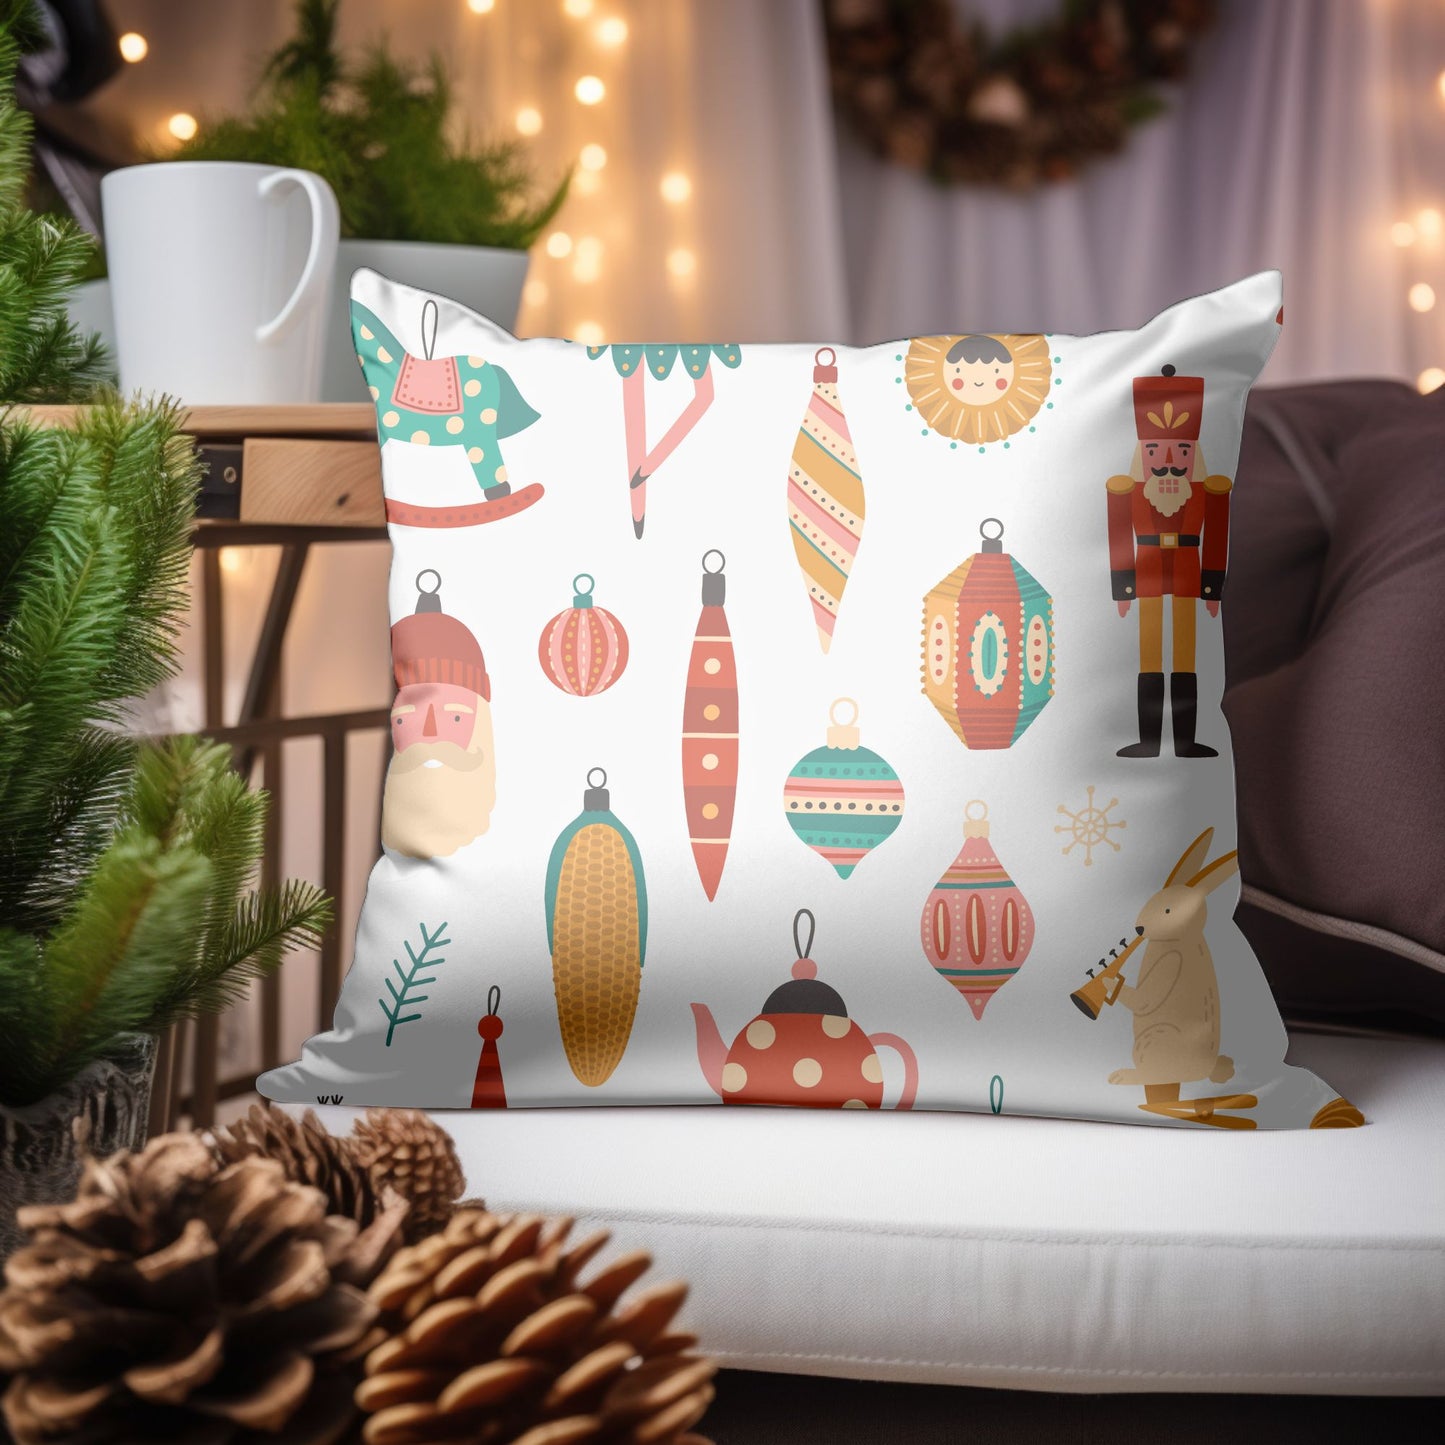 Winter Theme Pillow Cover with Scenic Design